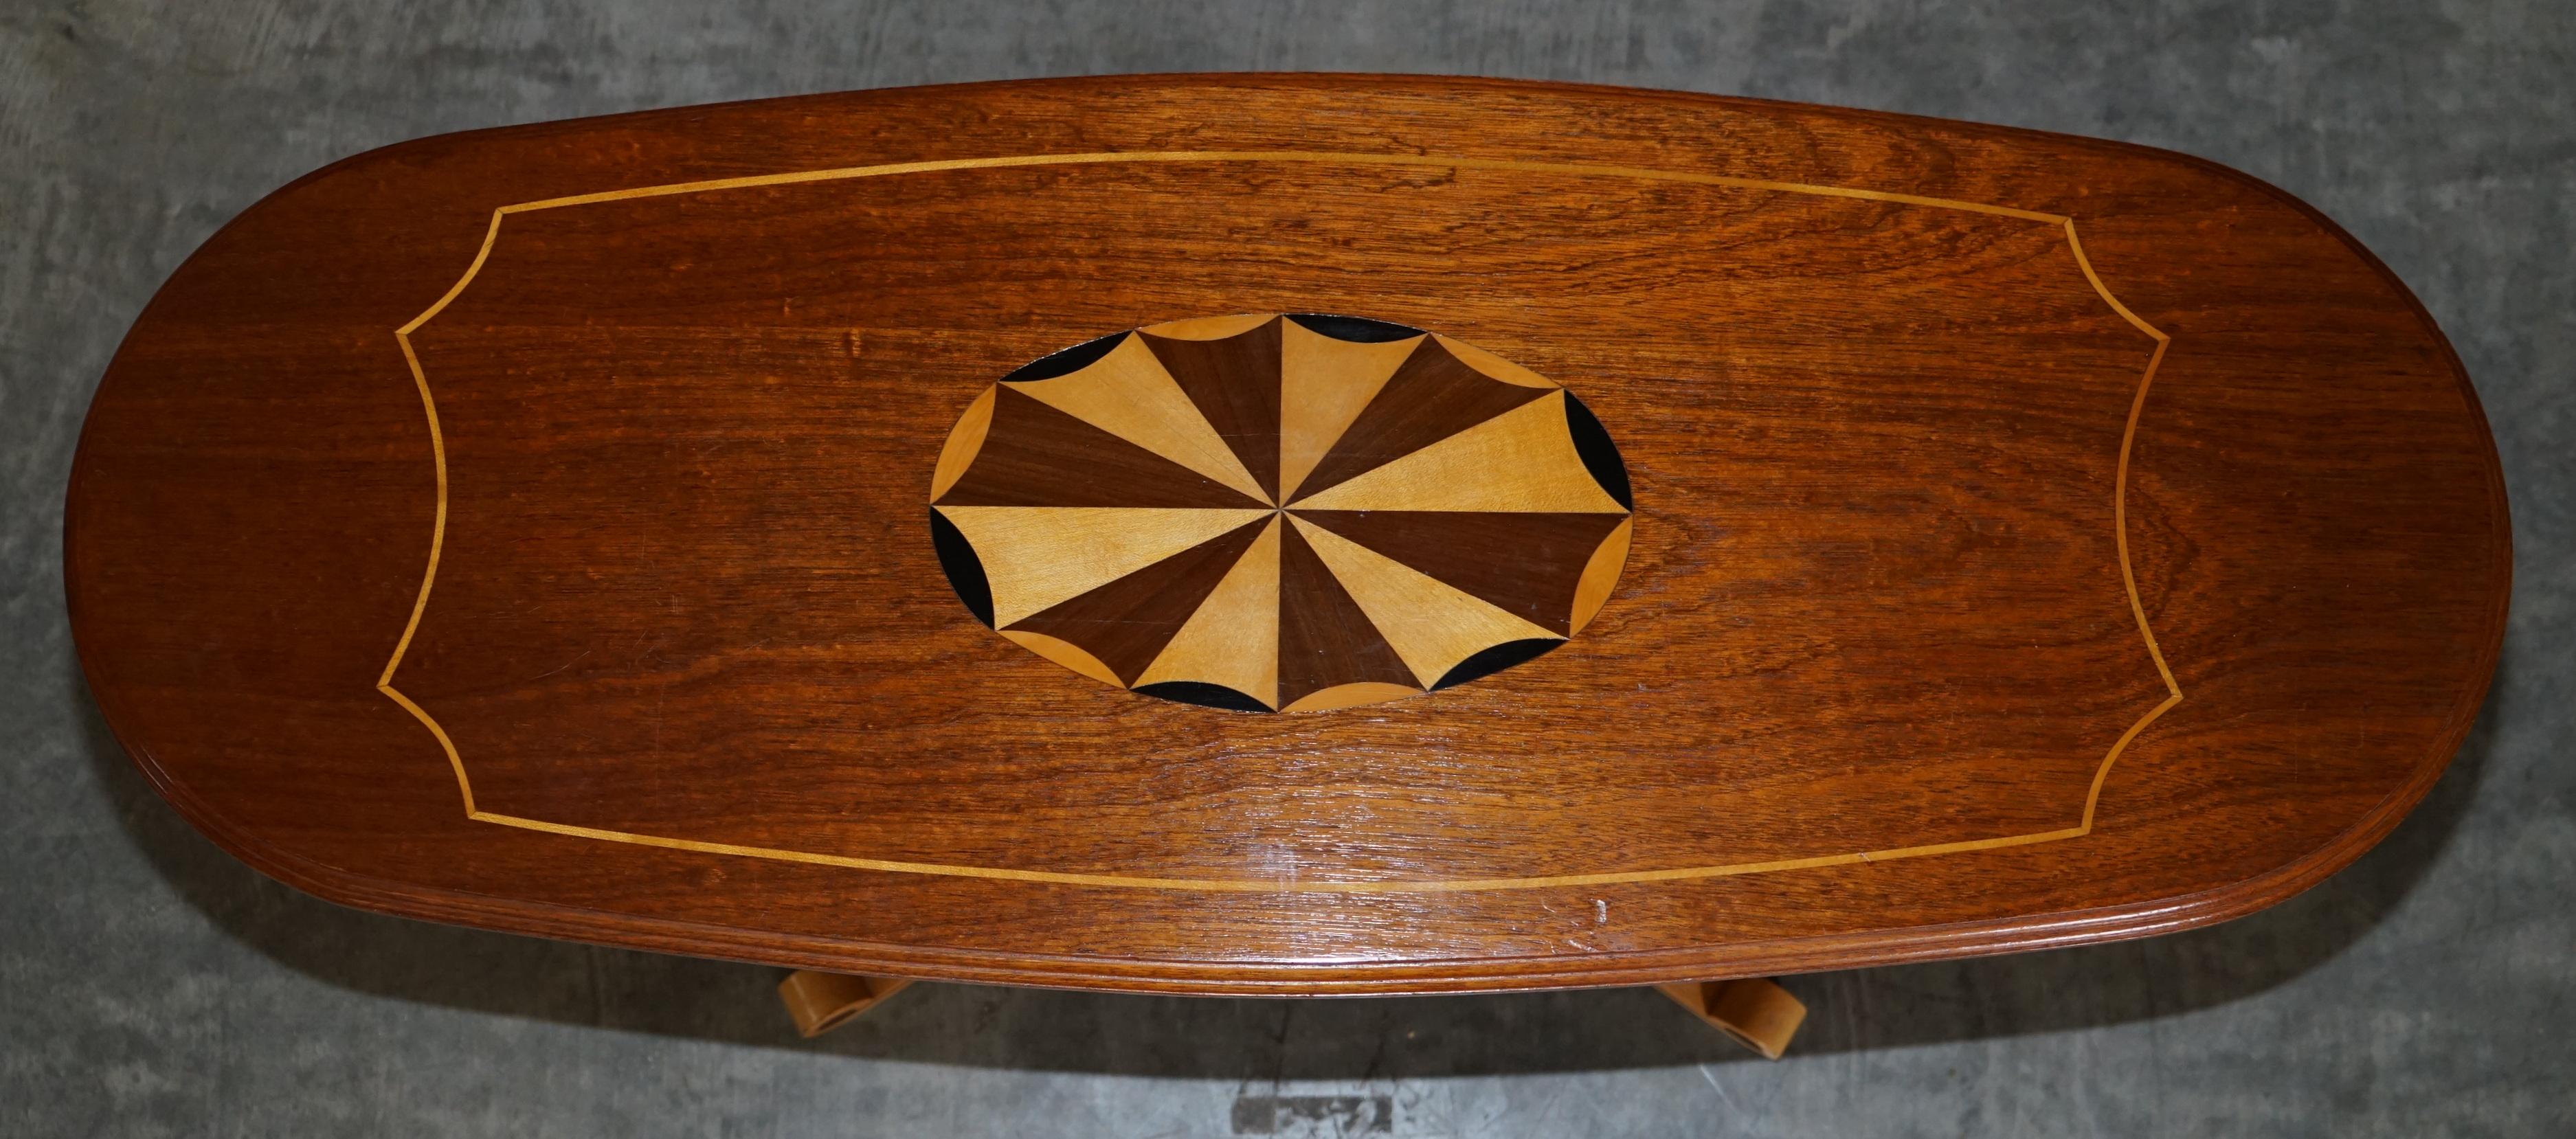 Hand-Crafted Lovely Sheraton Revival David Linley Style Maple & Hardwood Oval Coffee Table For Sale